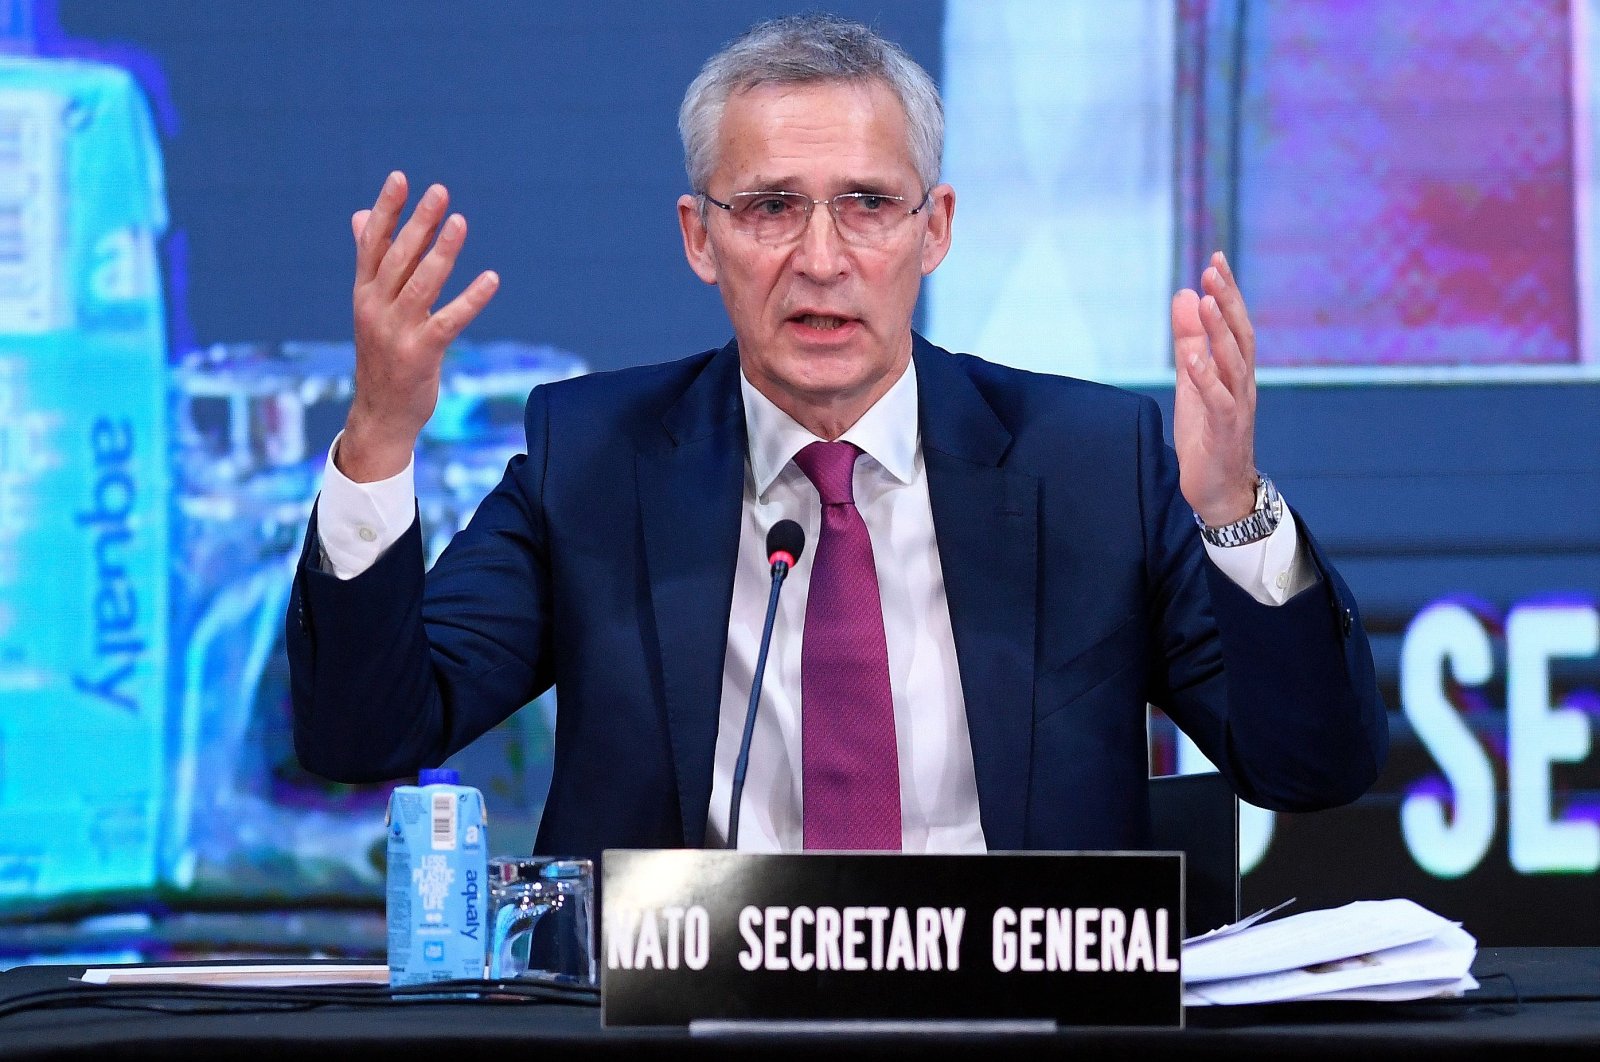 NATO Secretary-General Jens Stoltenberg gestures as he speaks during a NATO Parliamentary Assembly annual session held in Madrid, Spain, Nov. 21, 2022. (AFP Photo)